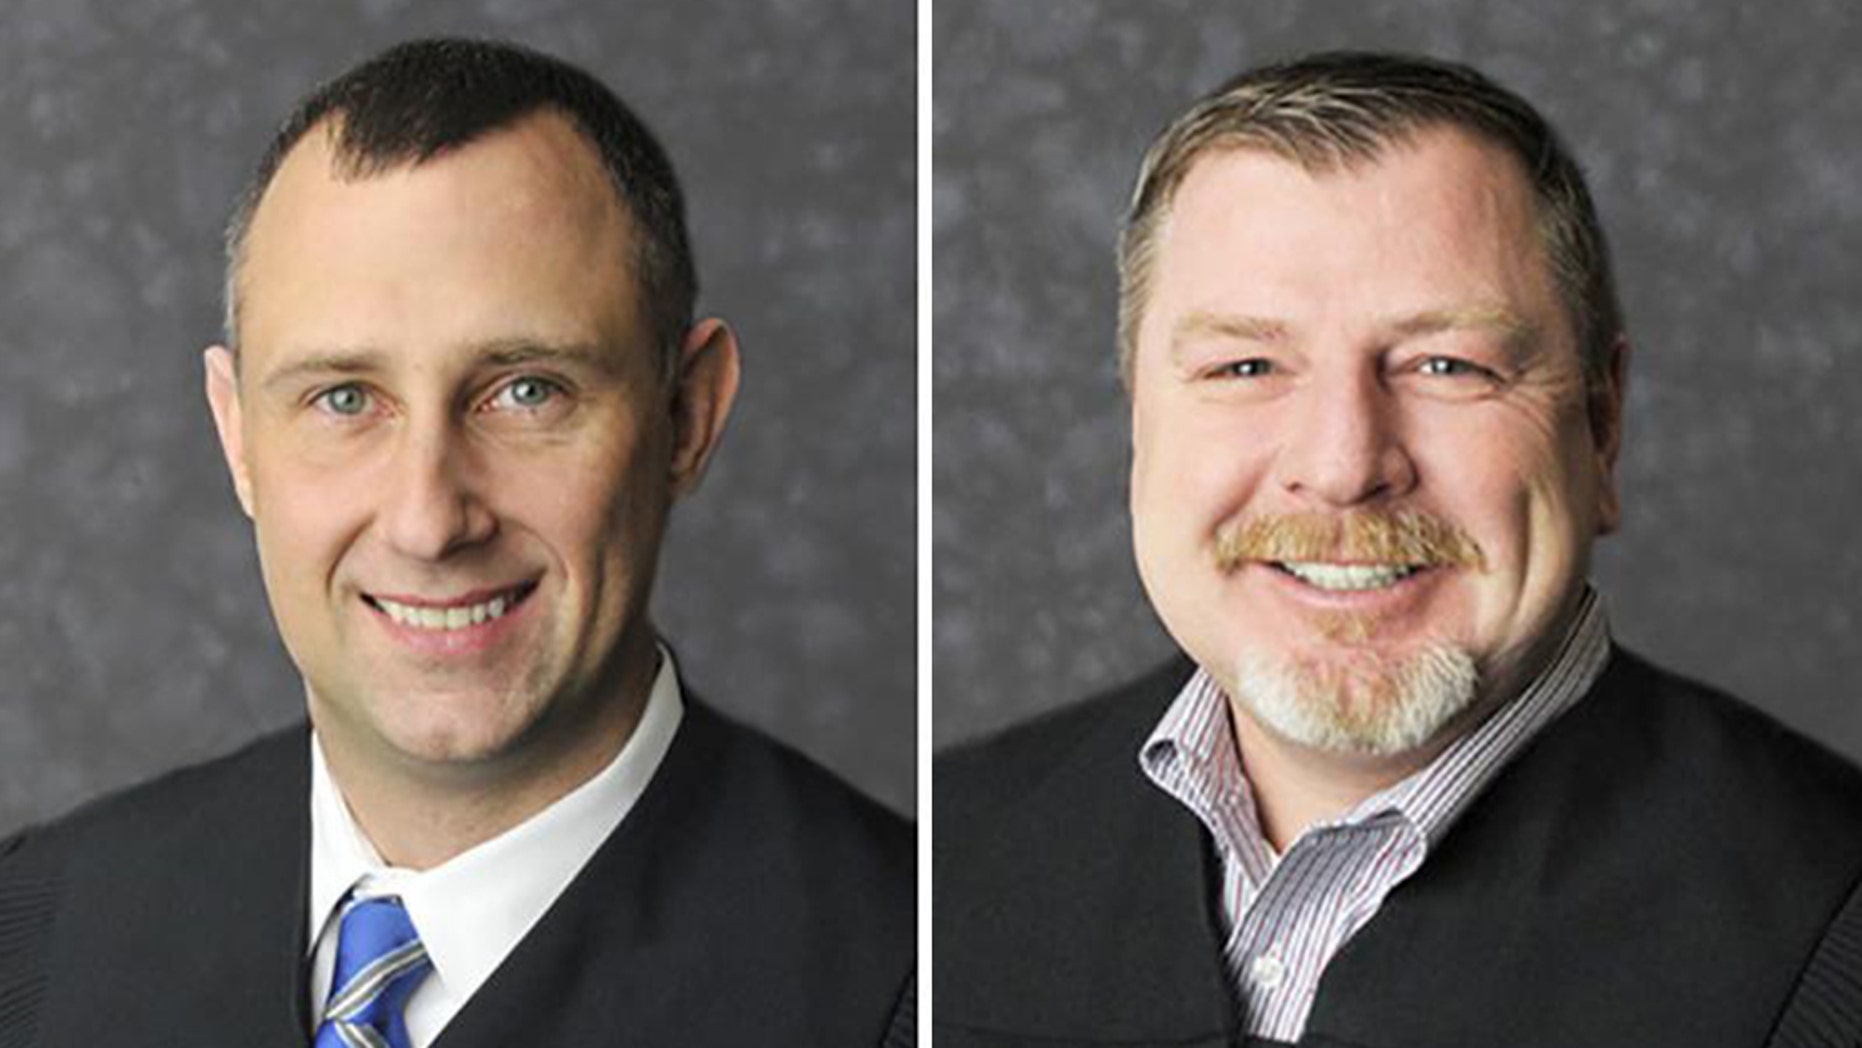 Just deserts: 2 judges shot in parking lot of fast-food restaurant Judges-Bradely-Jacobs-and-Andew-Adams